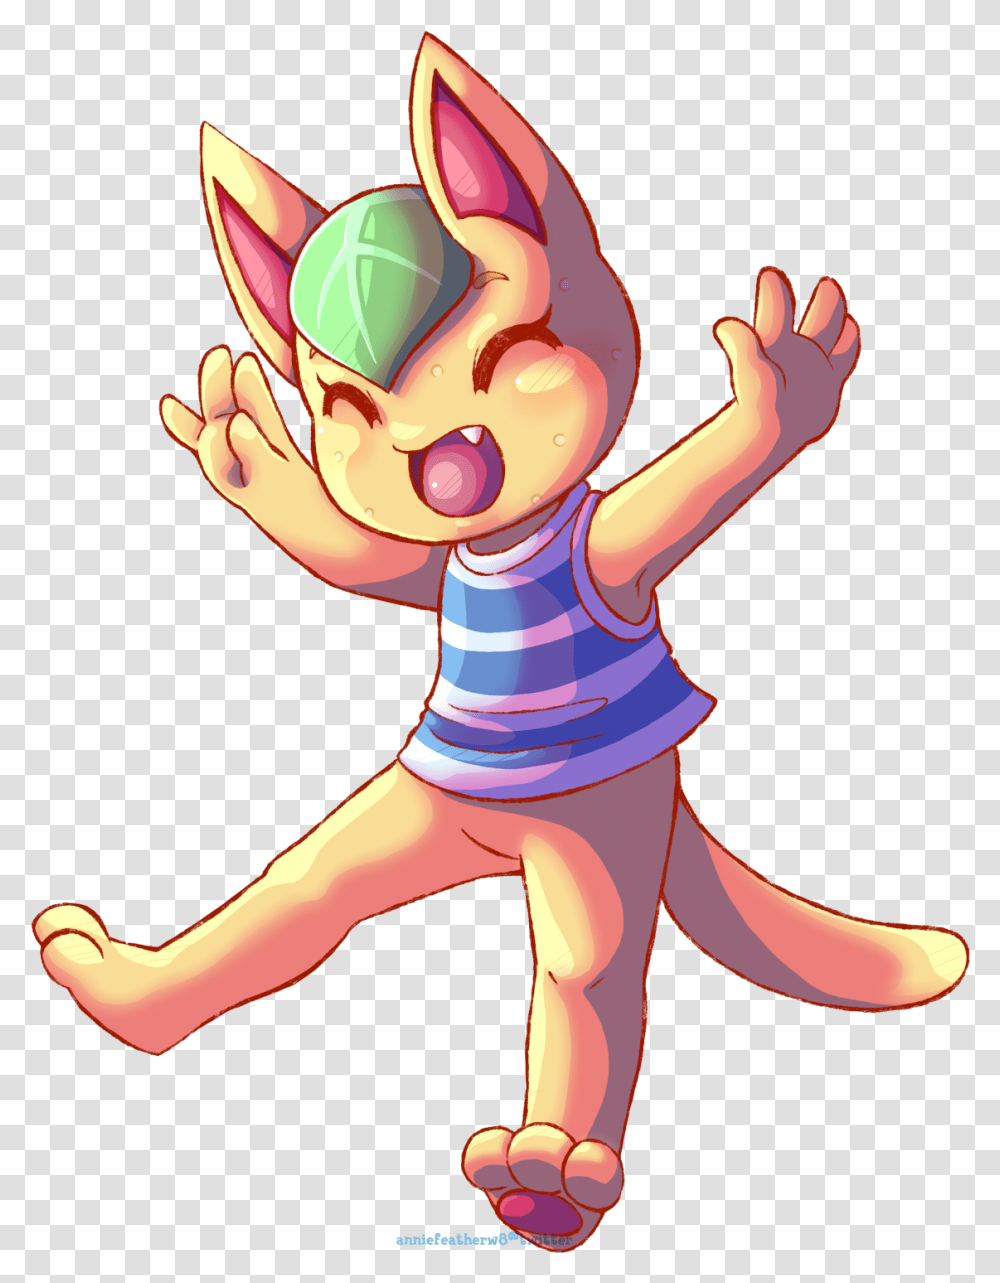 Tangy Animal Crossing Cartoons, Toy, Leisure Activities, Dance Pose, Frisbee Transparent Png